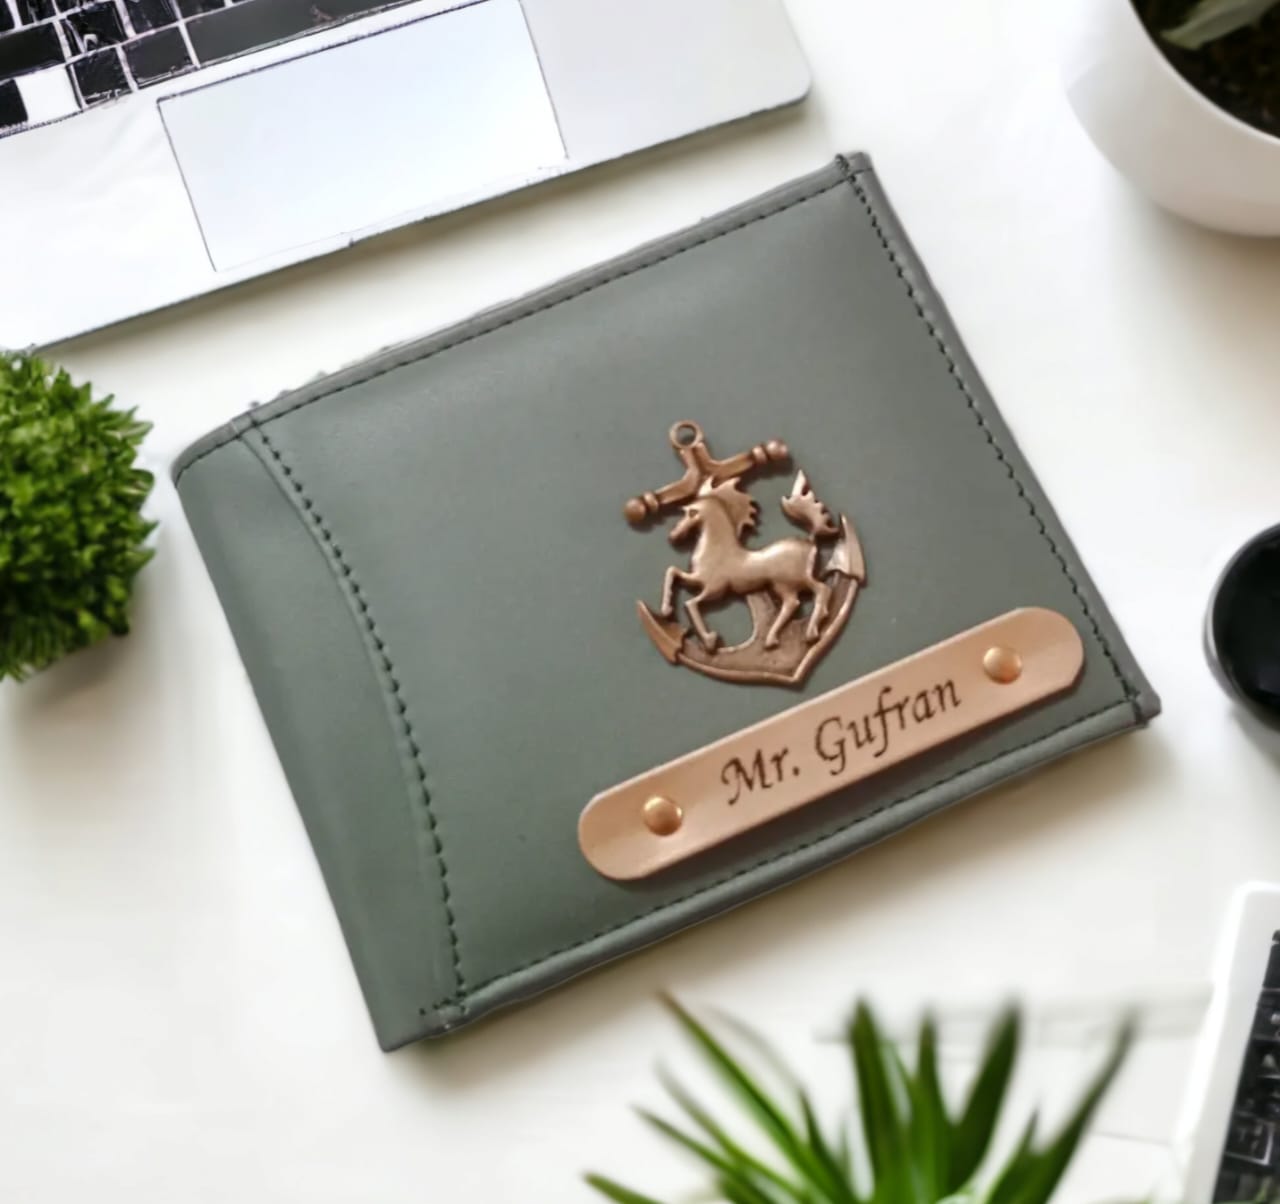 MEN'S WALLET & KEYCHAIN WITH FREE CHARM – The Junket